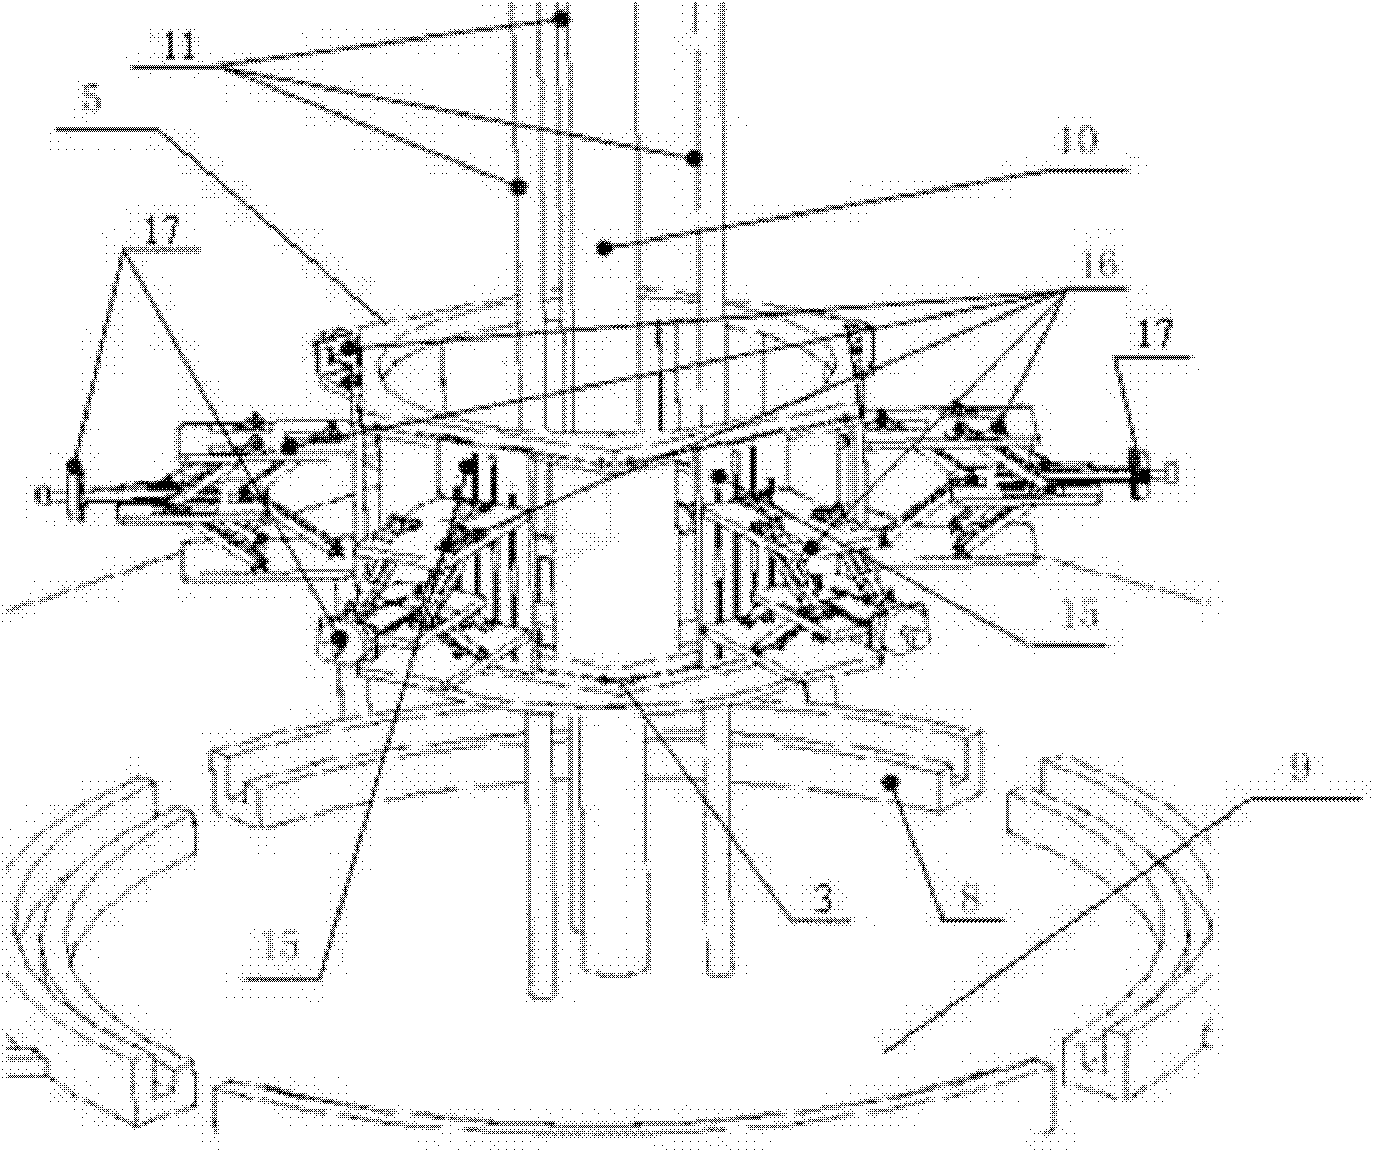 Self-propelled type mechanism for inner wall processing of large barrel